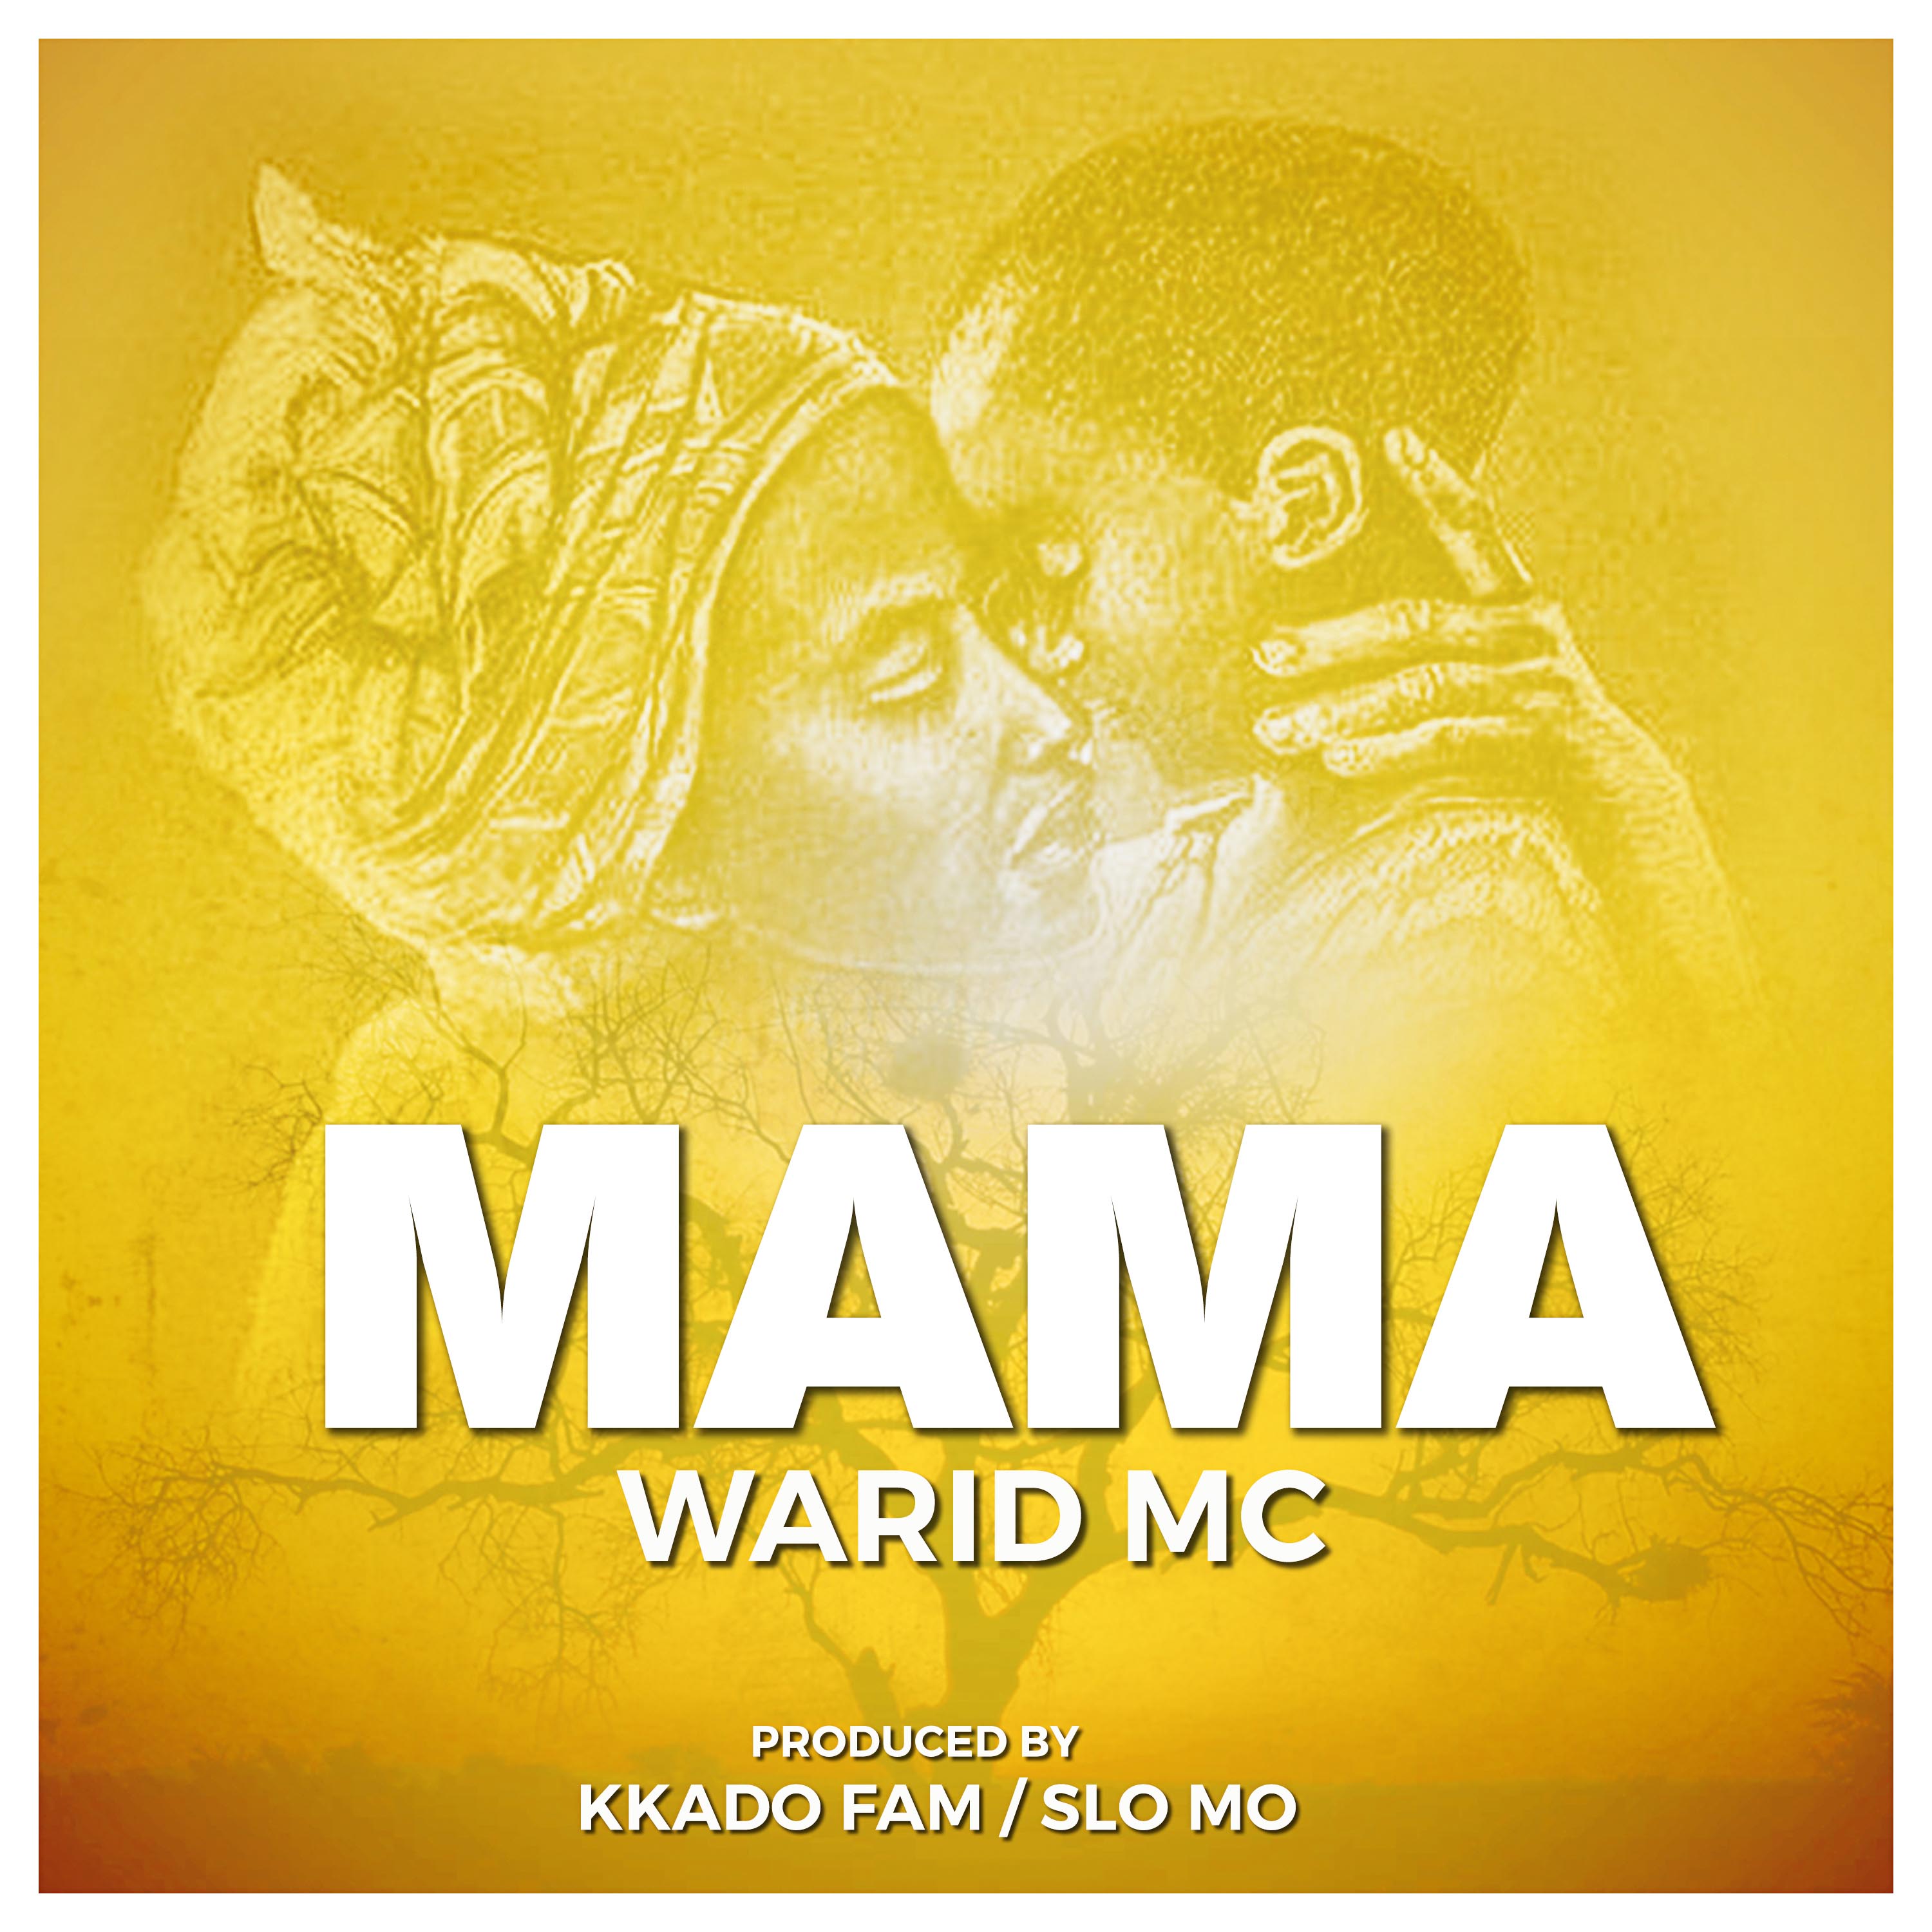 Songs for Mama from Luganda XLZ and MC Warid – Happy Mother’s day